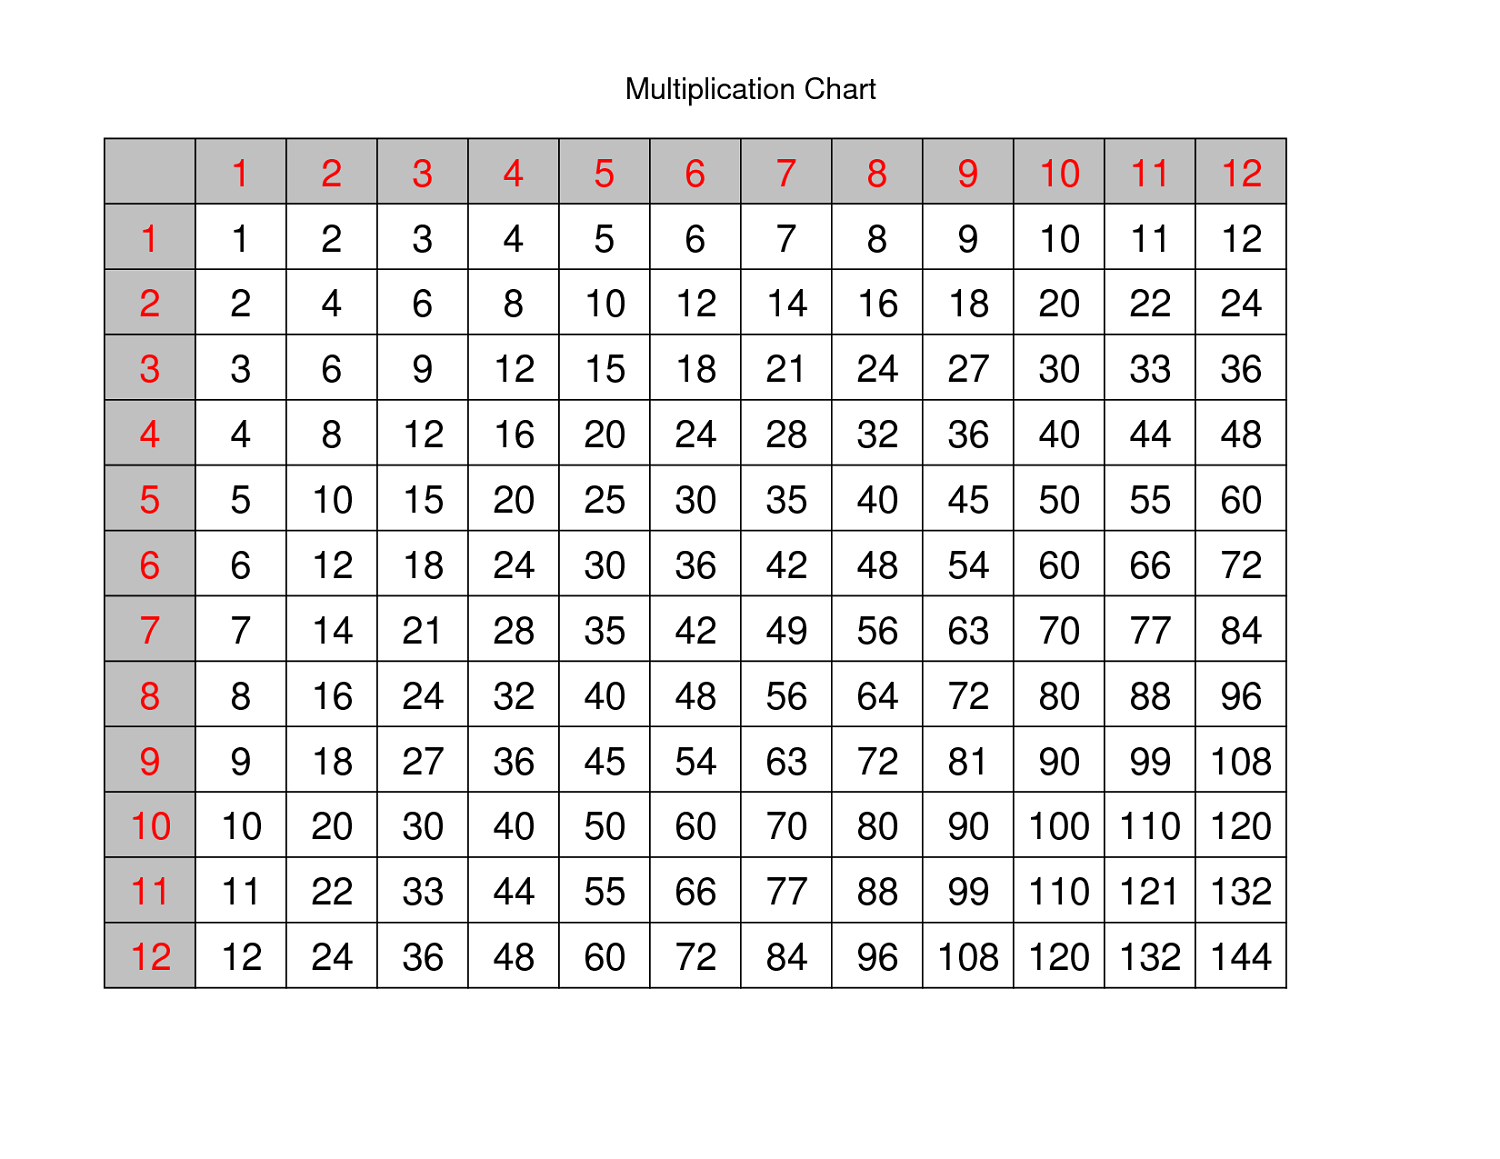 multiply-chart-table-learning